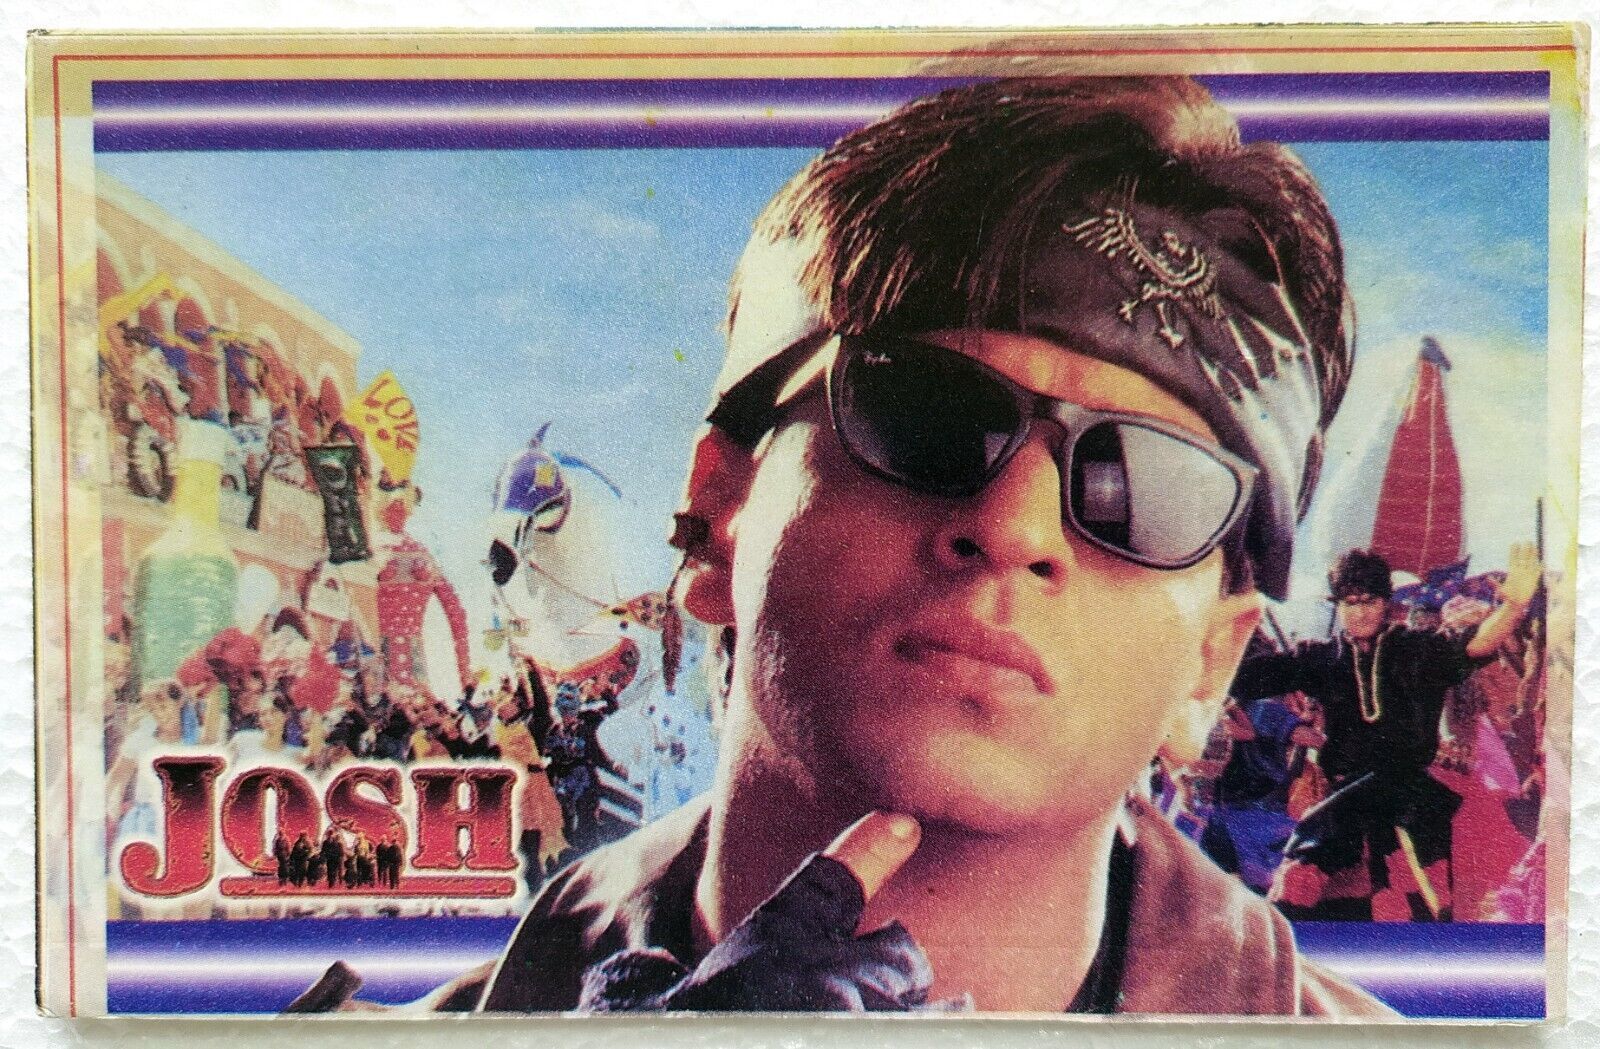 Primary image for Bollywood Actor Super Star Shah Rukh Khan Old Original Postcard Post card India